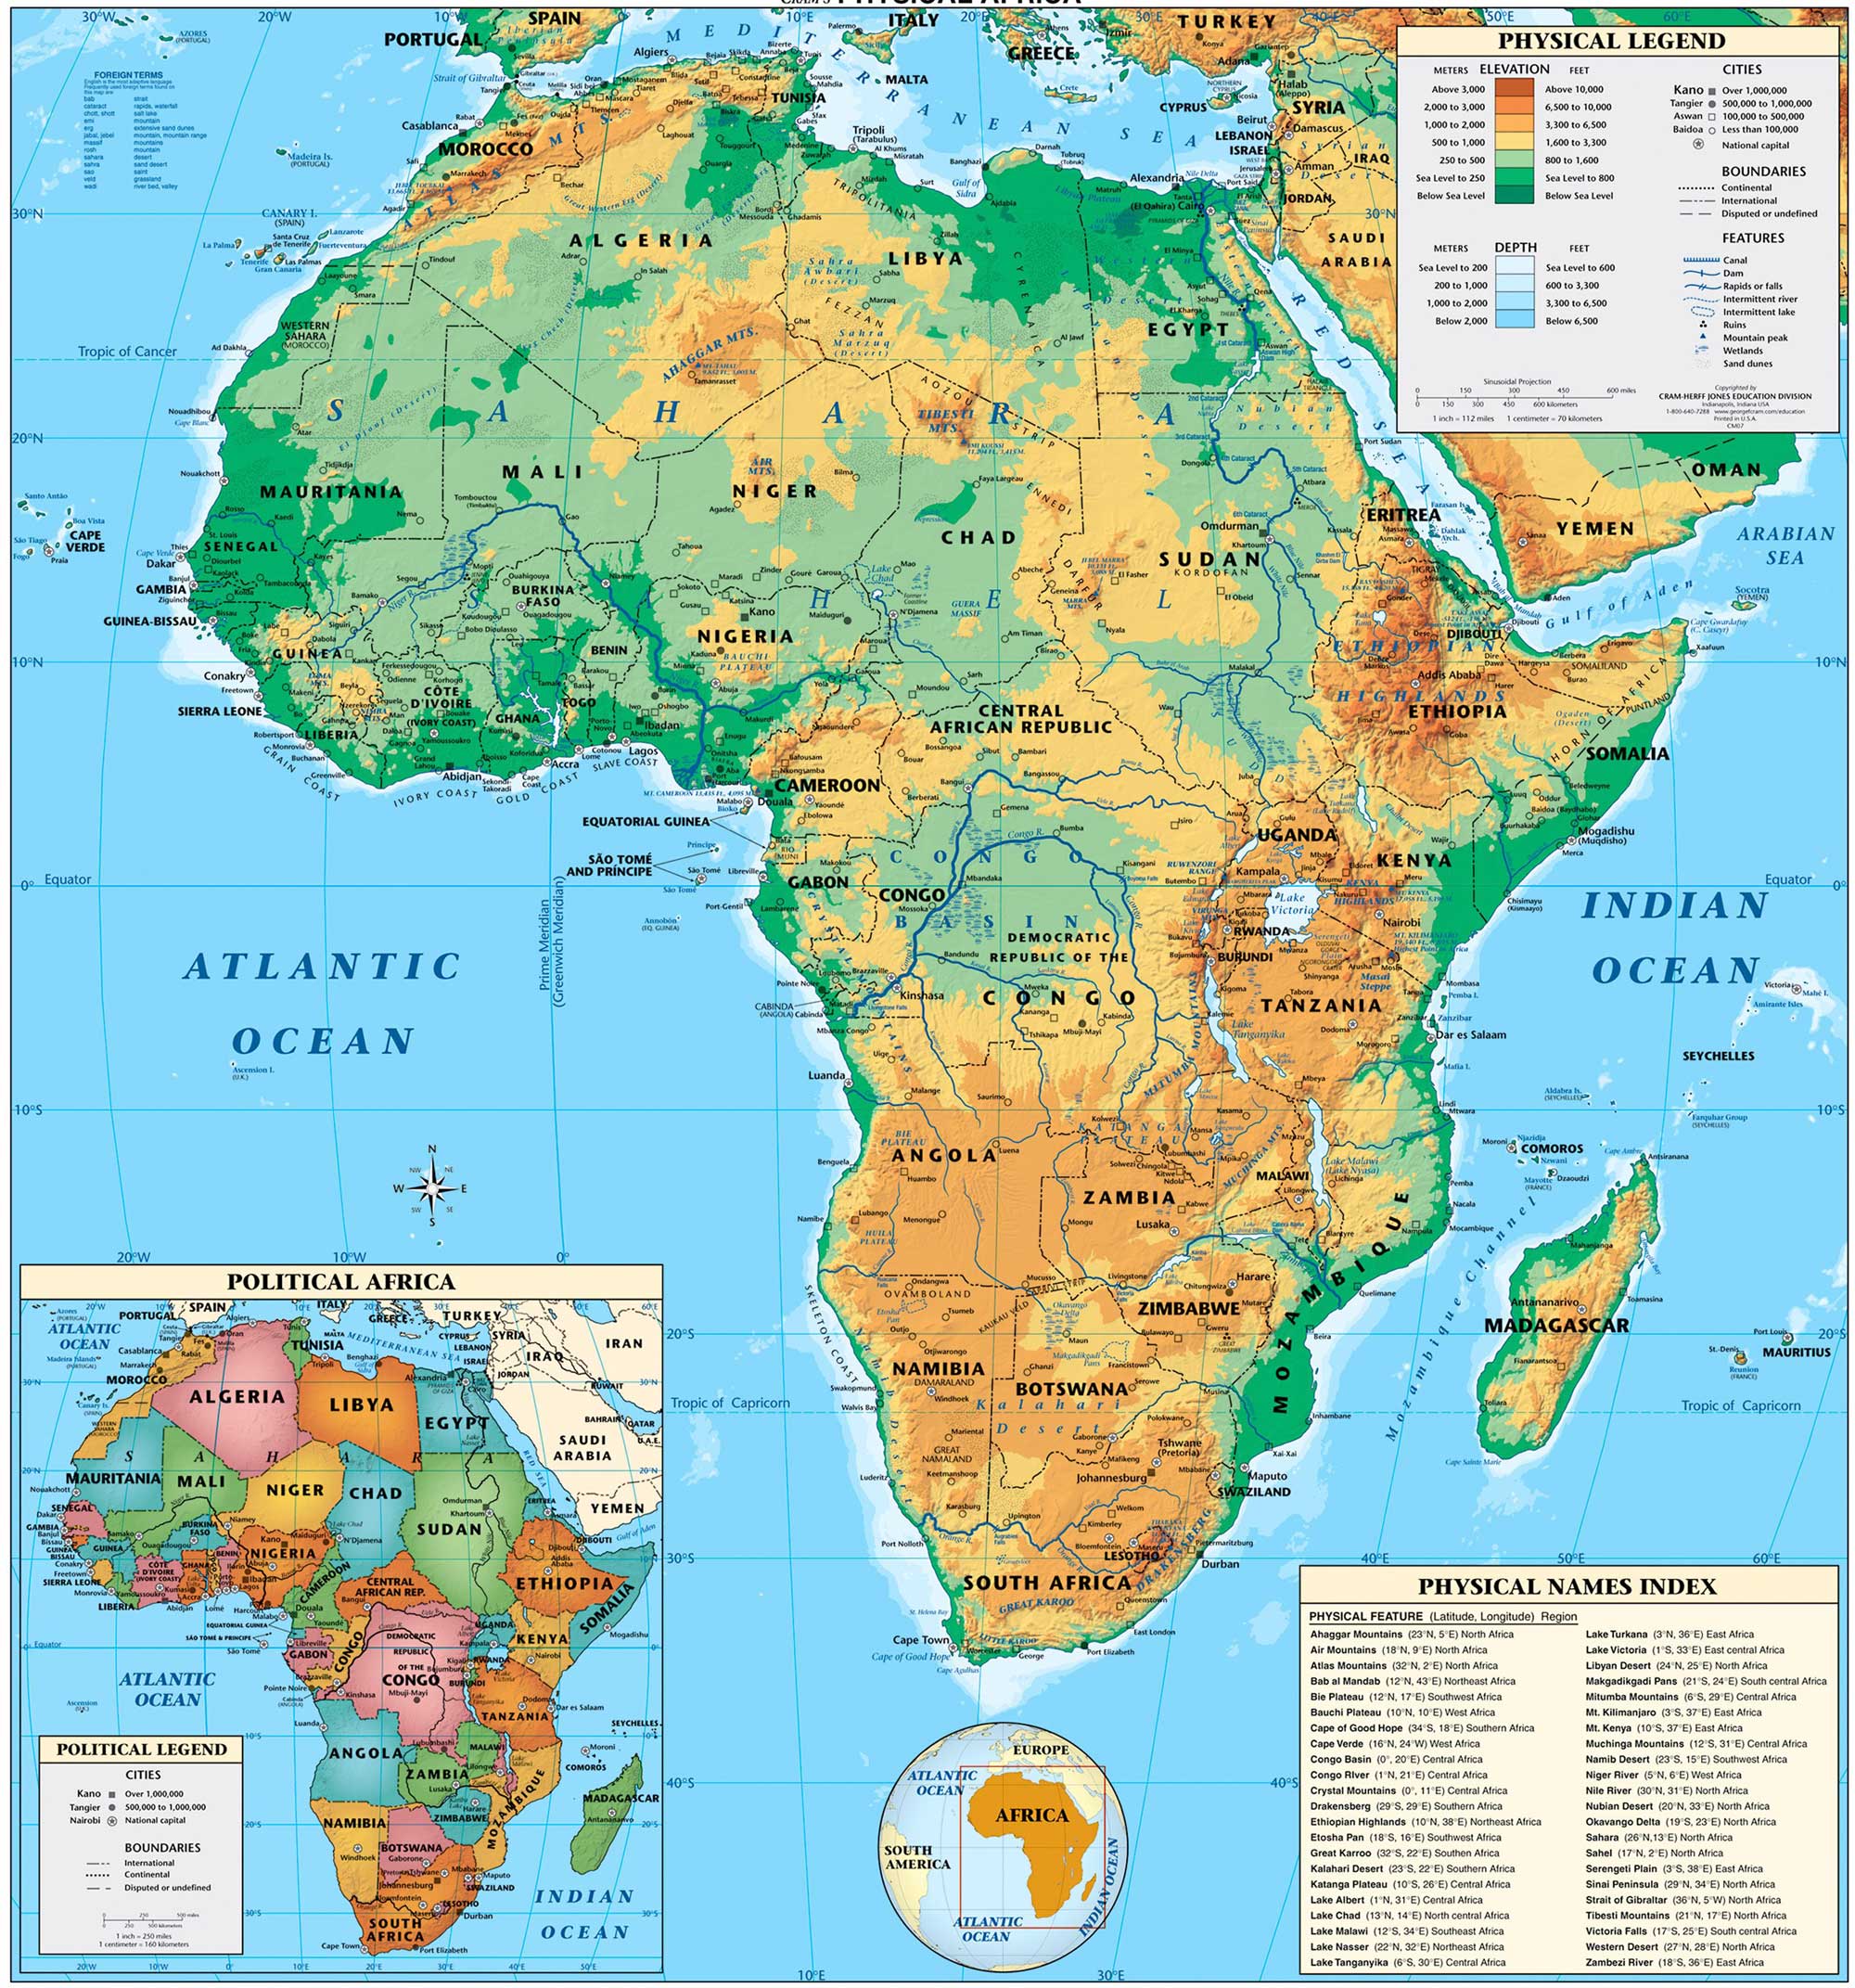 Africa physical map - Full size